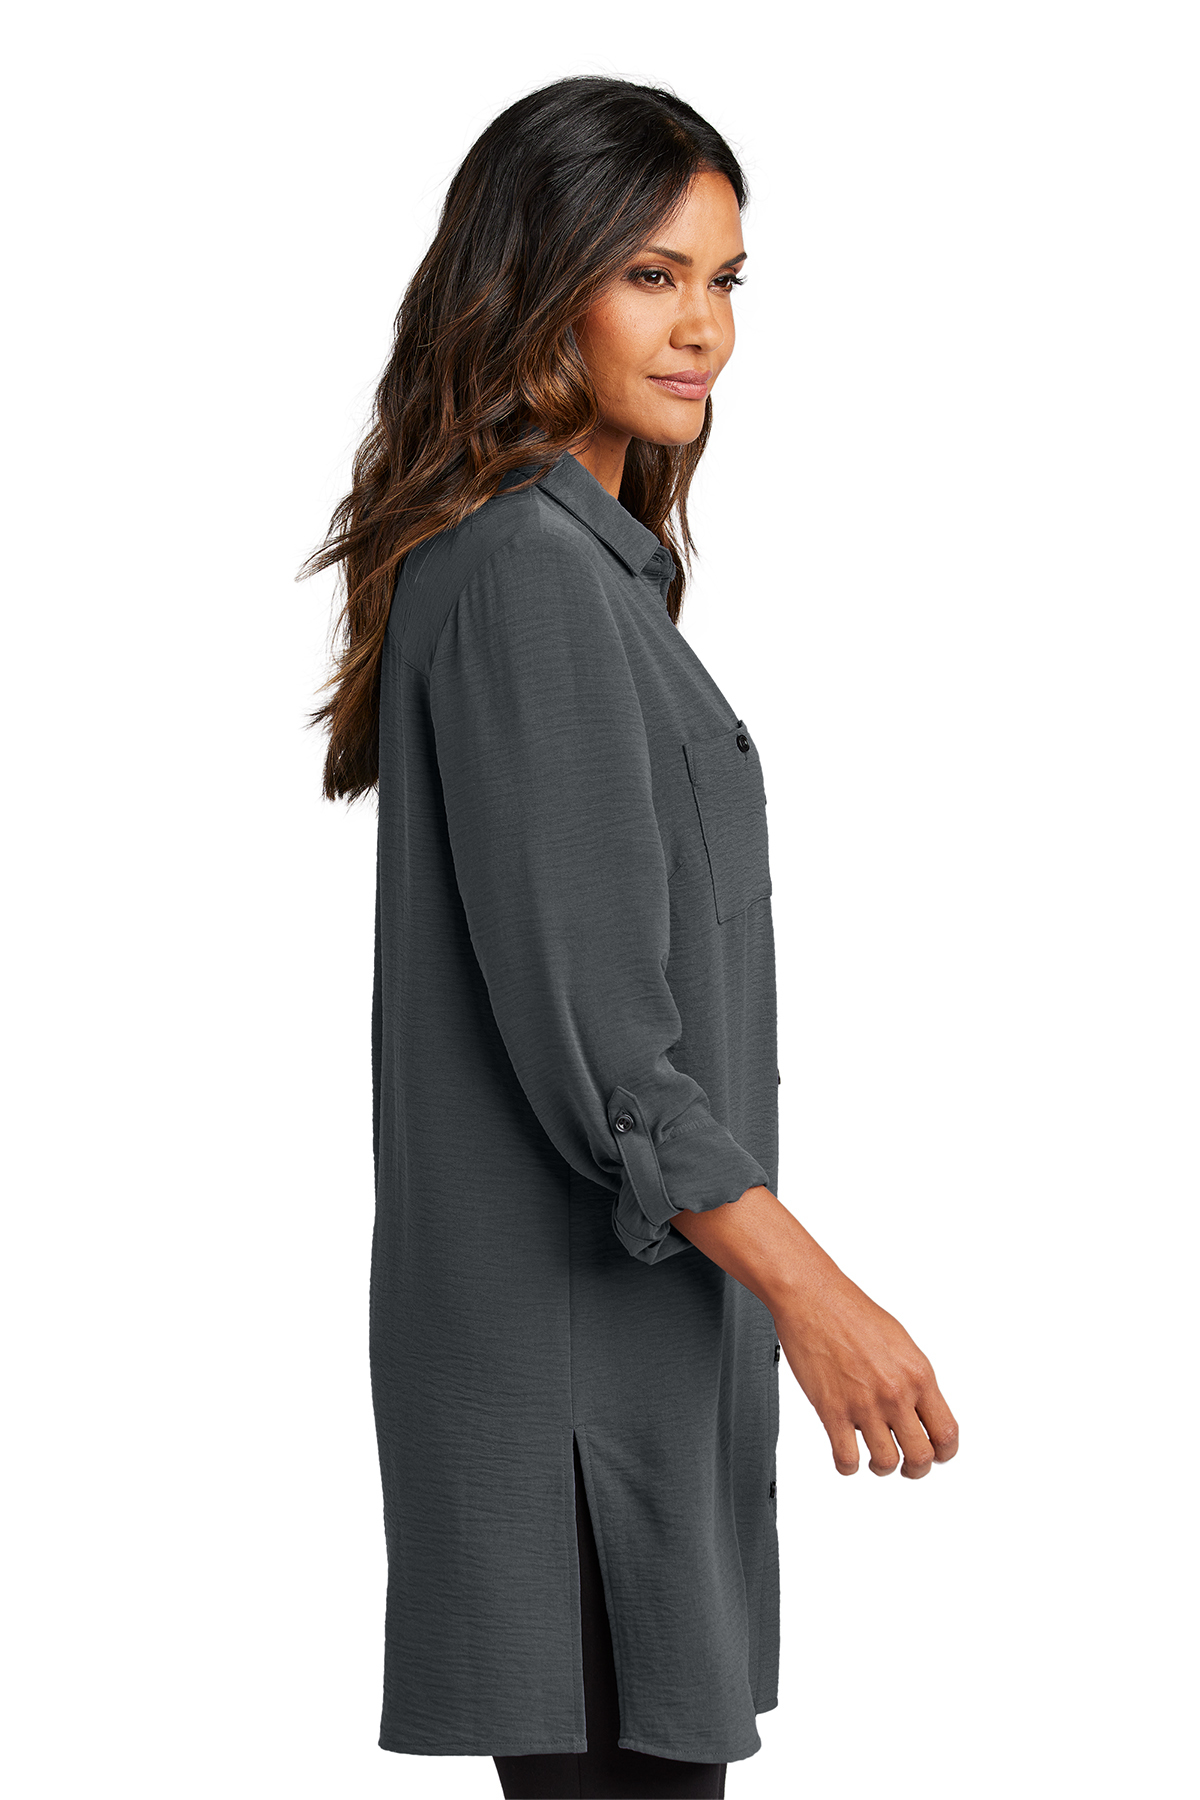 Port Authority Ladies Textured Crepe Long Tunic, Product